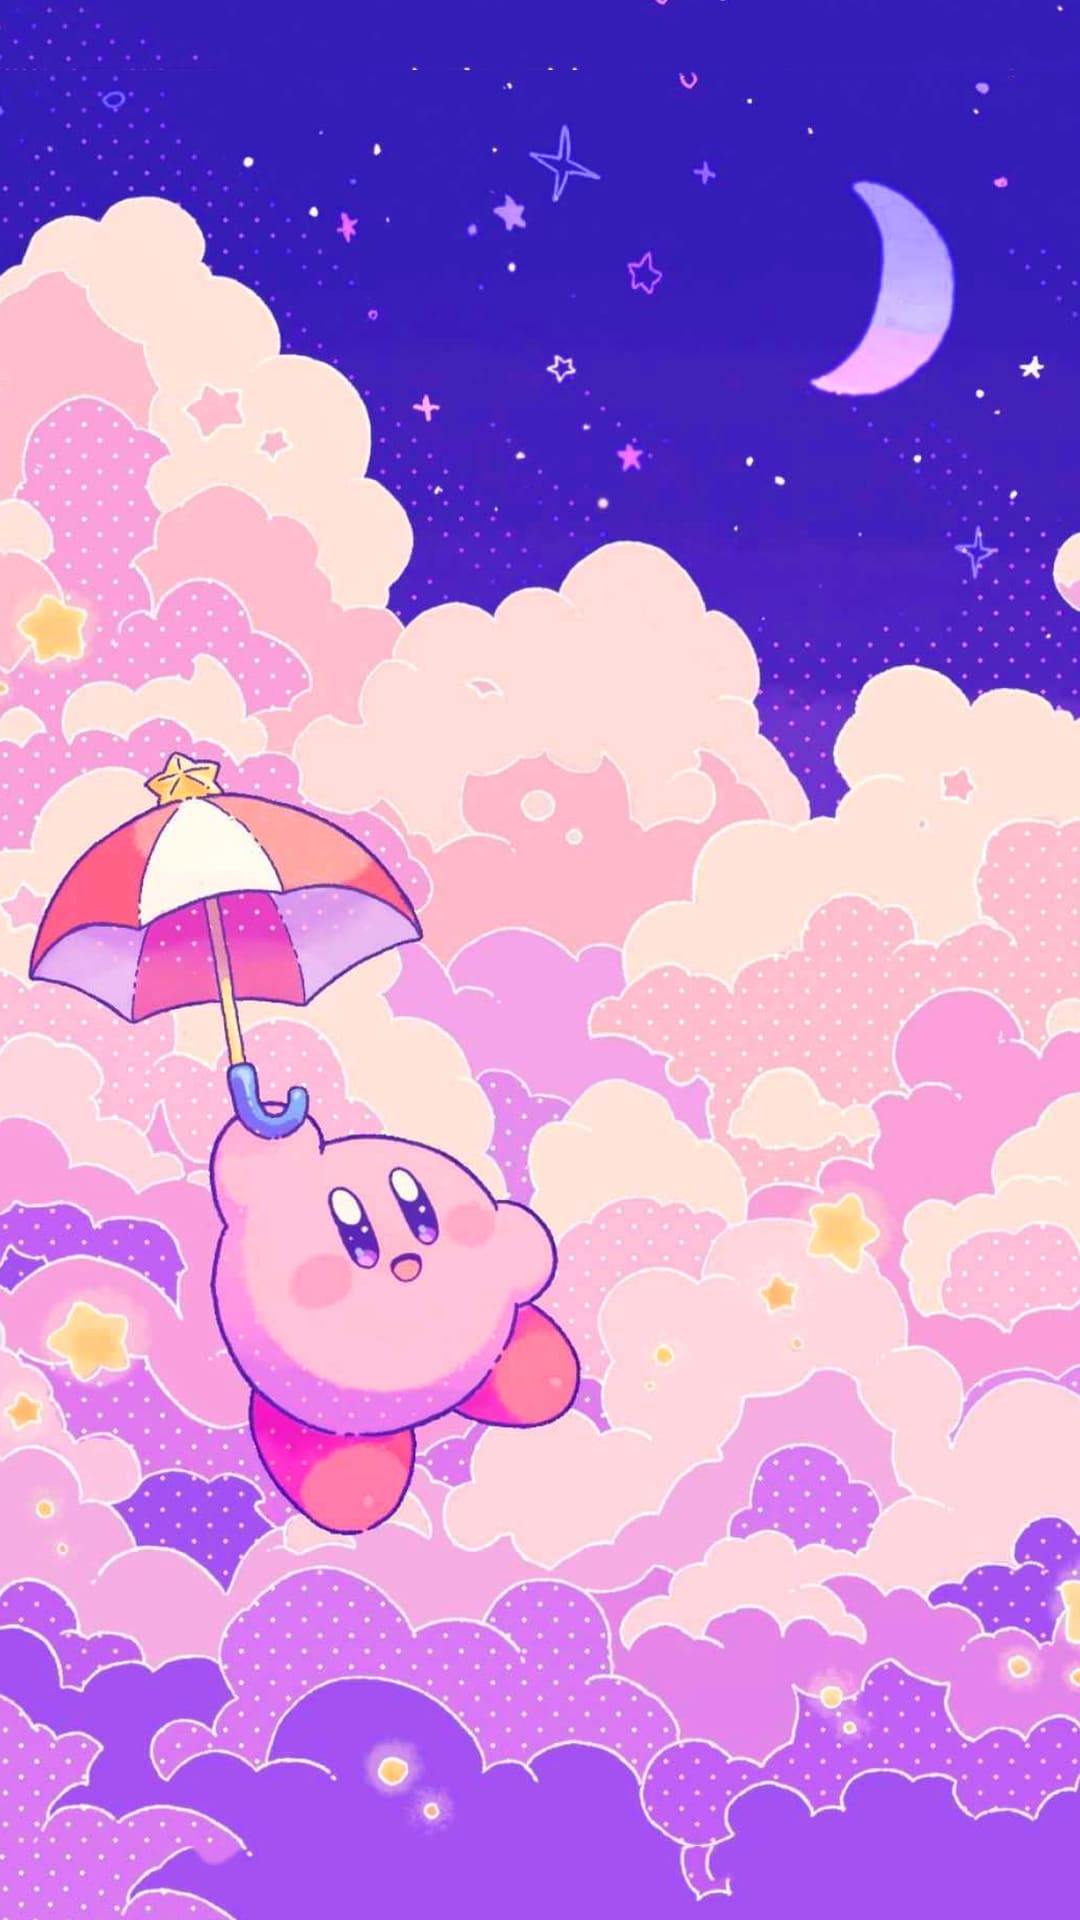 Kirby flying in the sky with an umbrella - Kirby